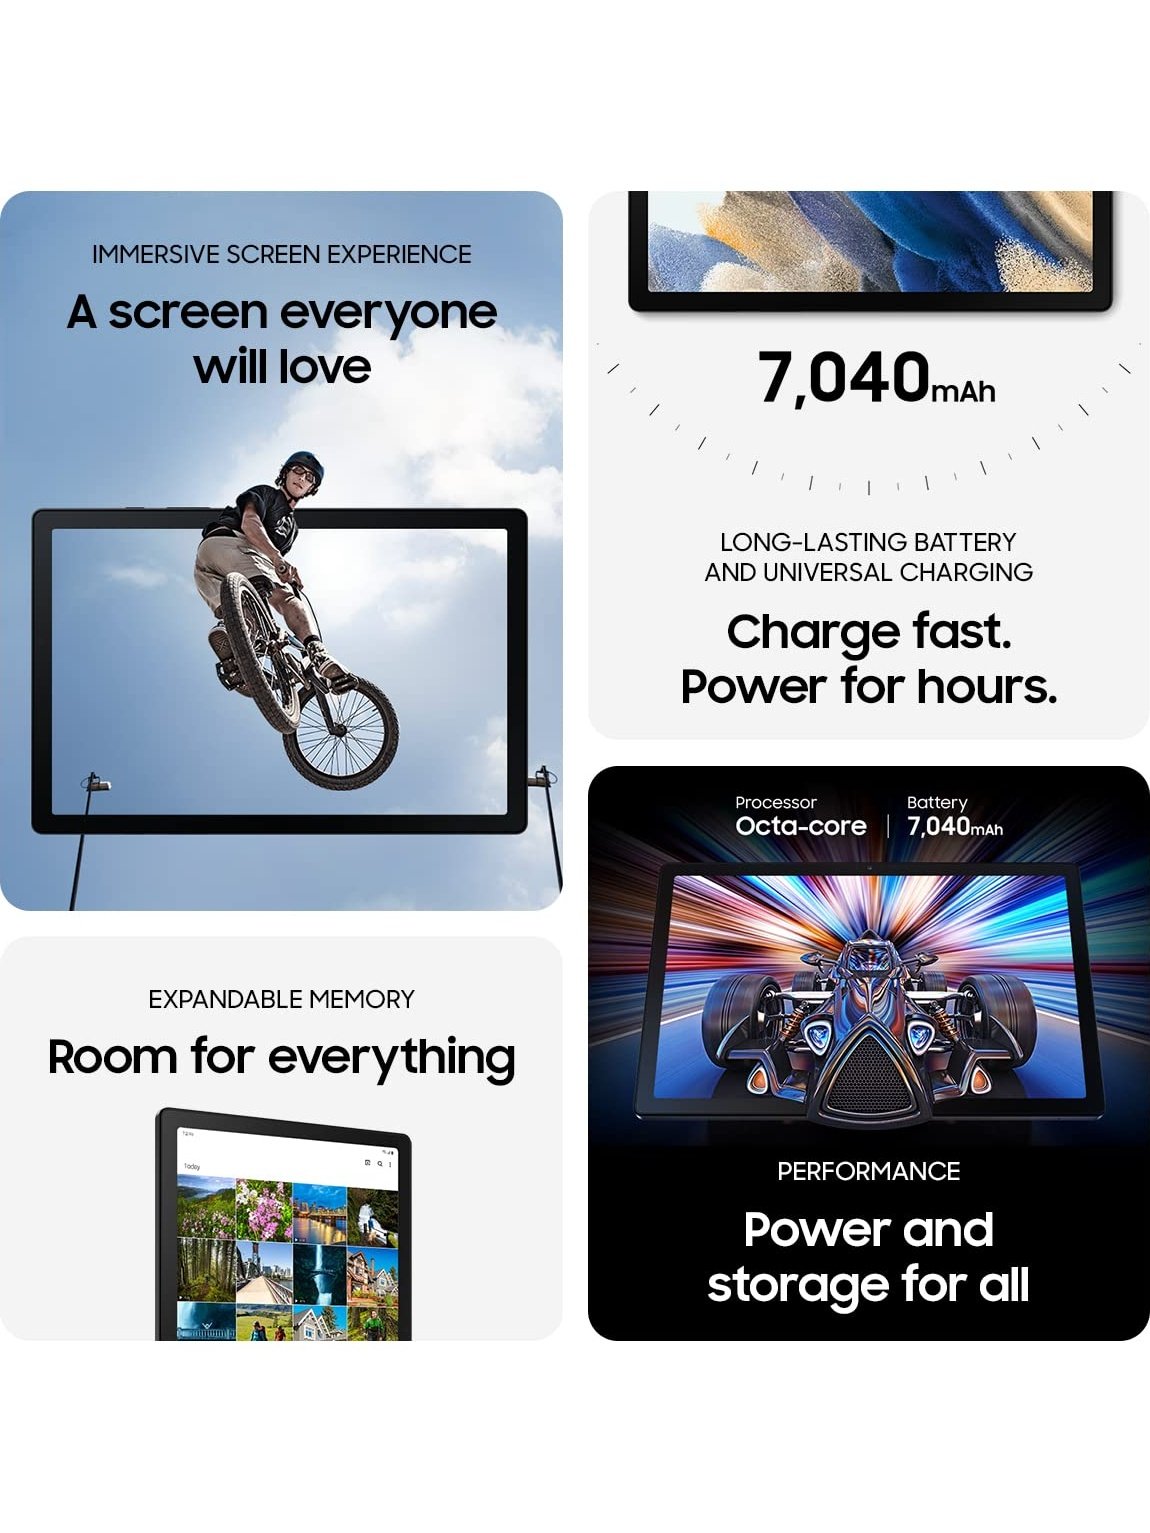 SAMSUNG Galaxy Tab A8 10.5” 32GB Android Tablet, LCD Screen, Kids Content, Smart Switch, Expandable Memory, Long Lasting Battery, Fast Charging, US Version, 2022, Dark Gray